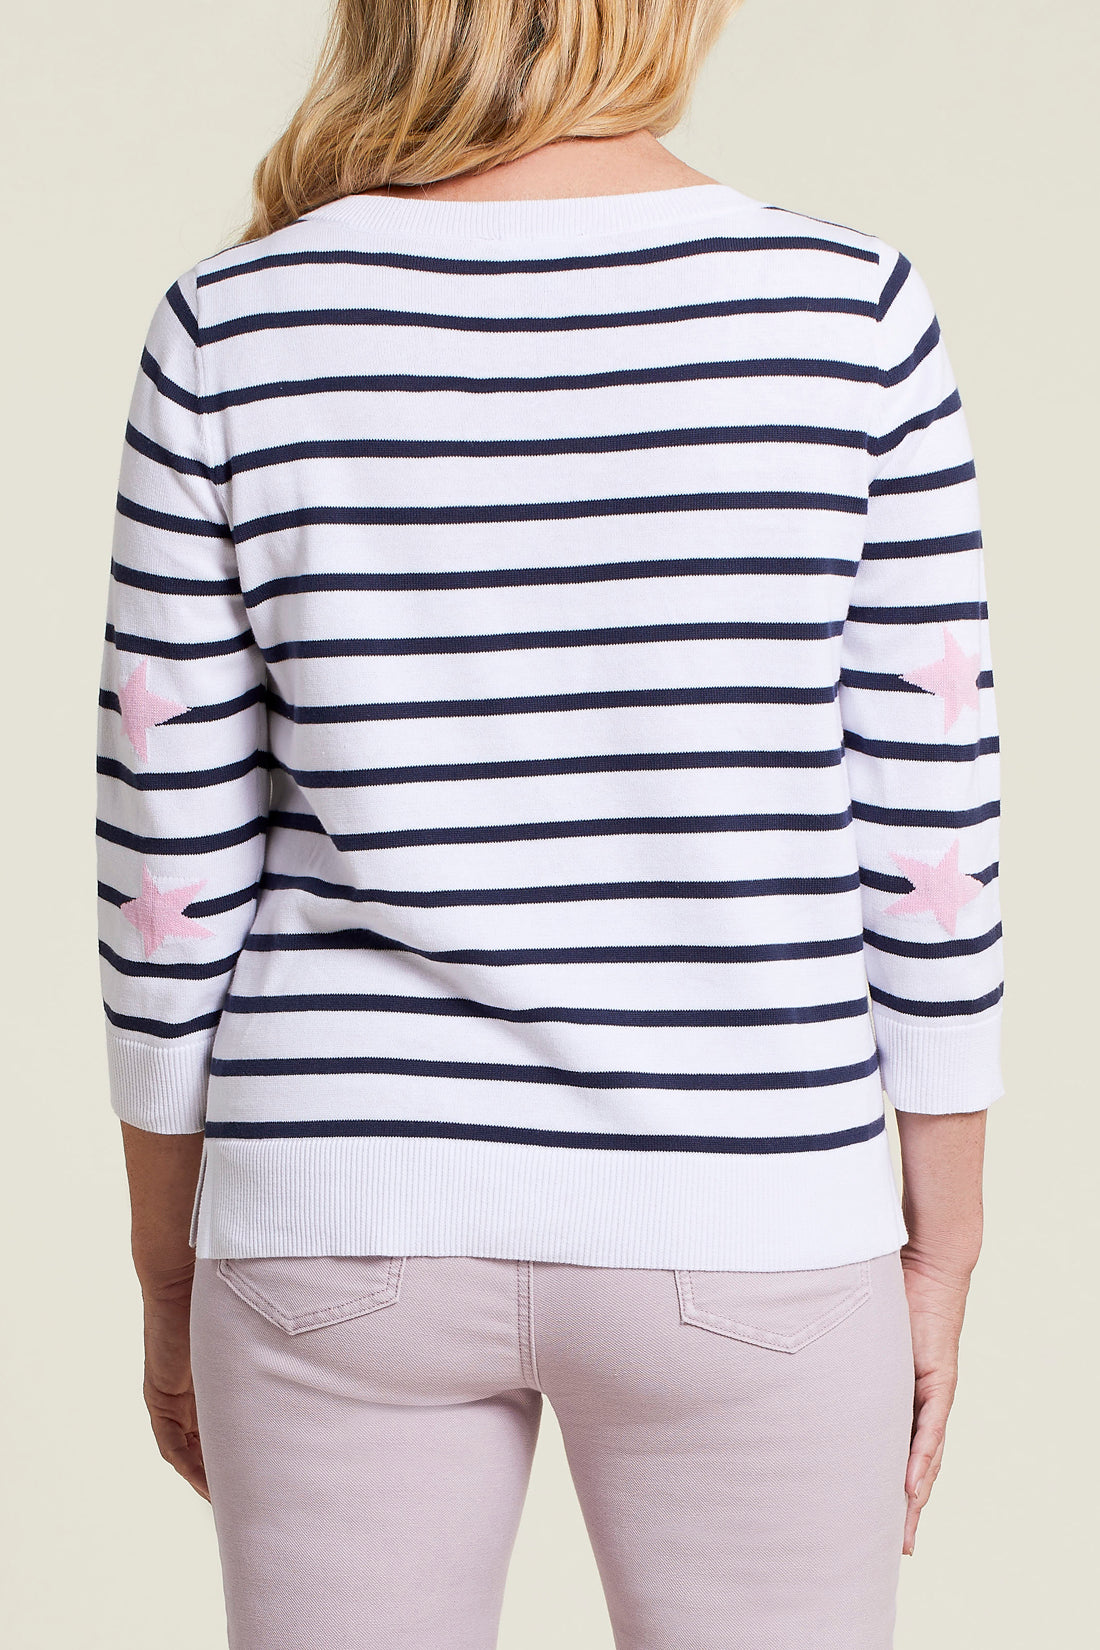 With Love Striped Boatneck Sweater by Tribal